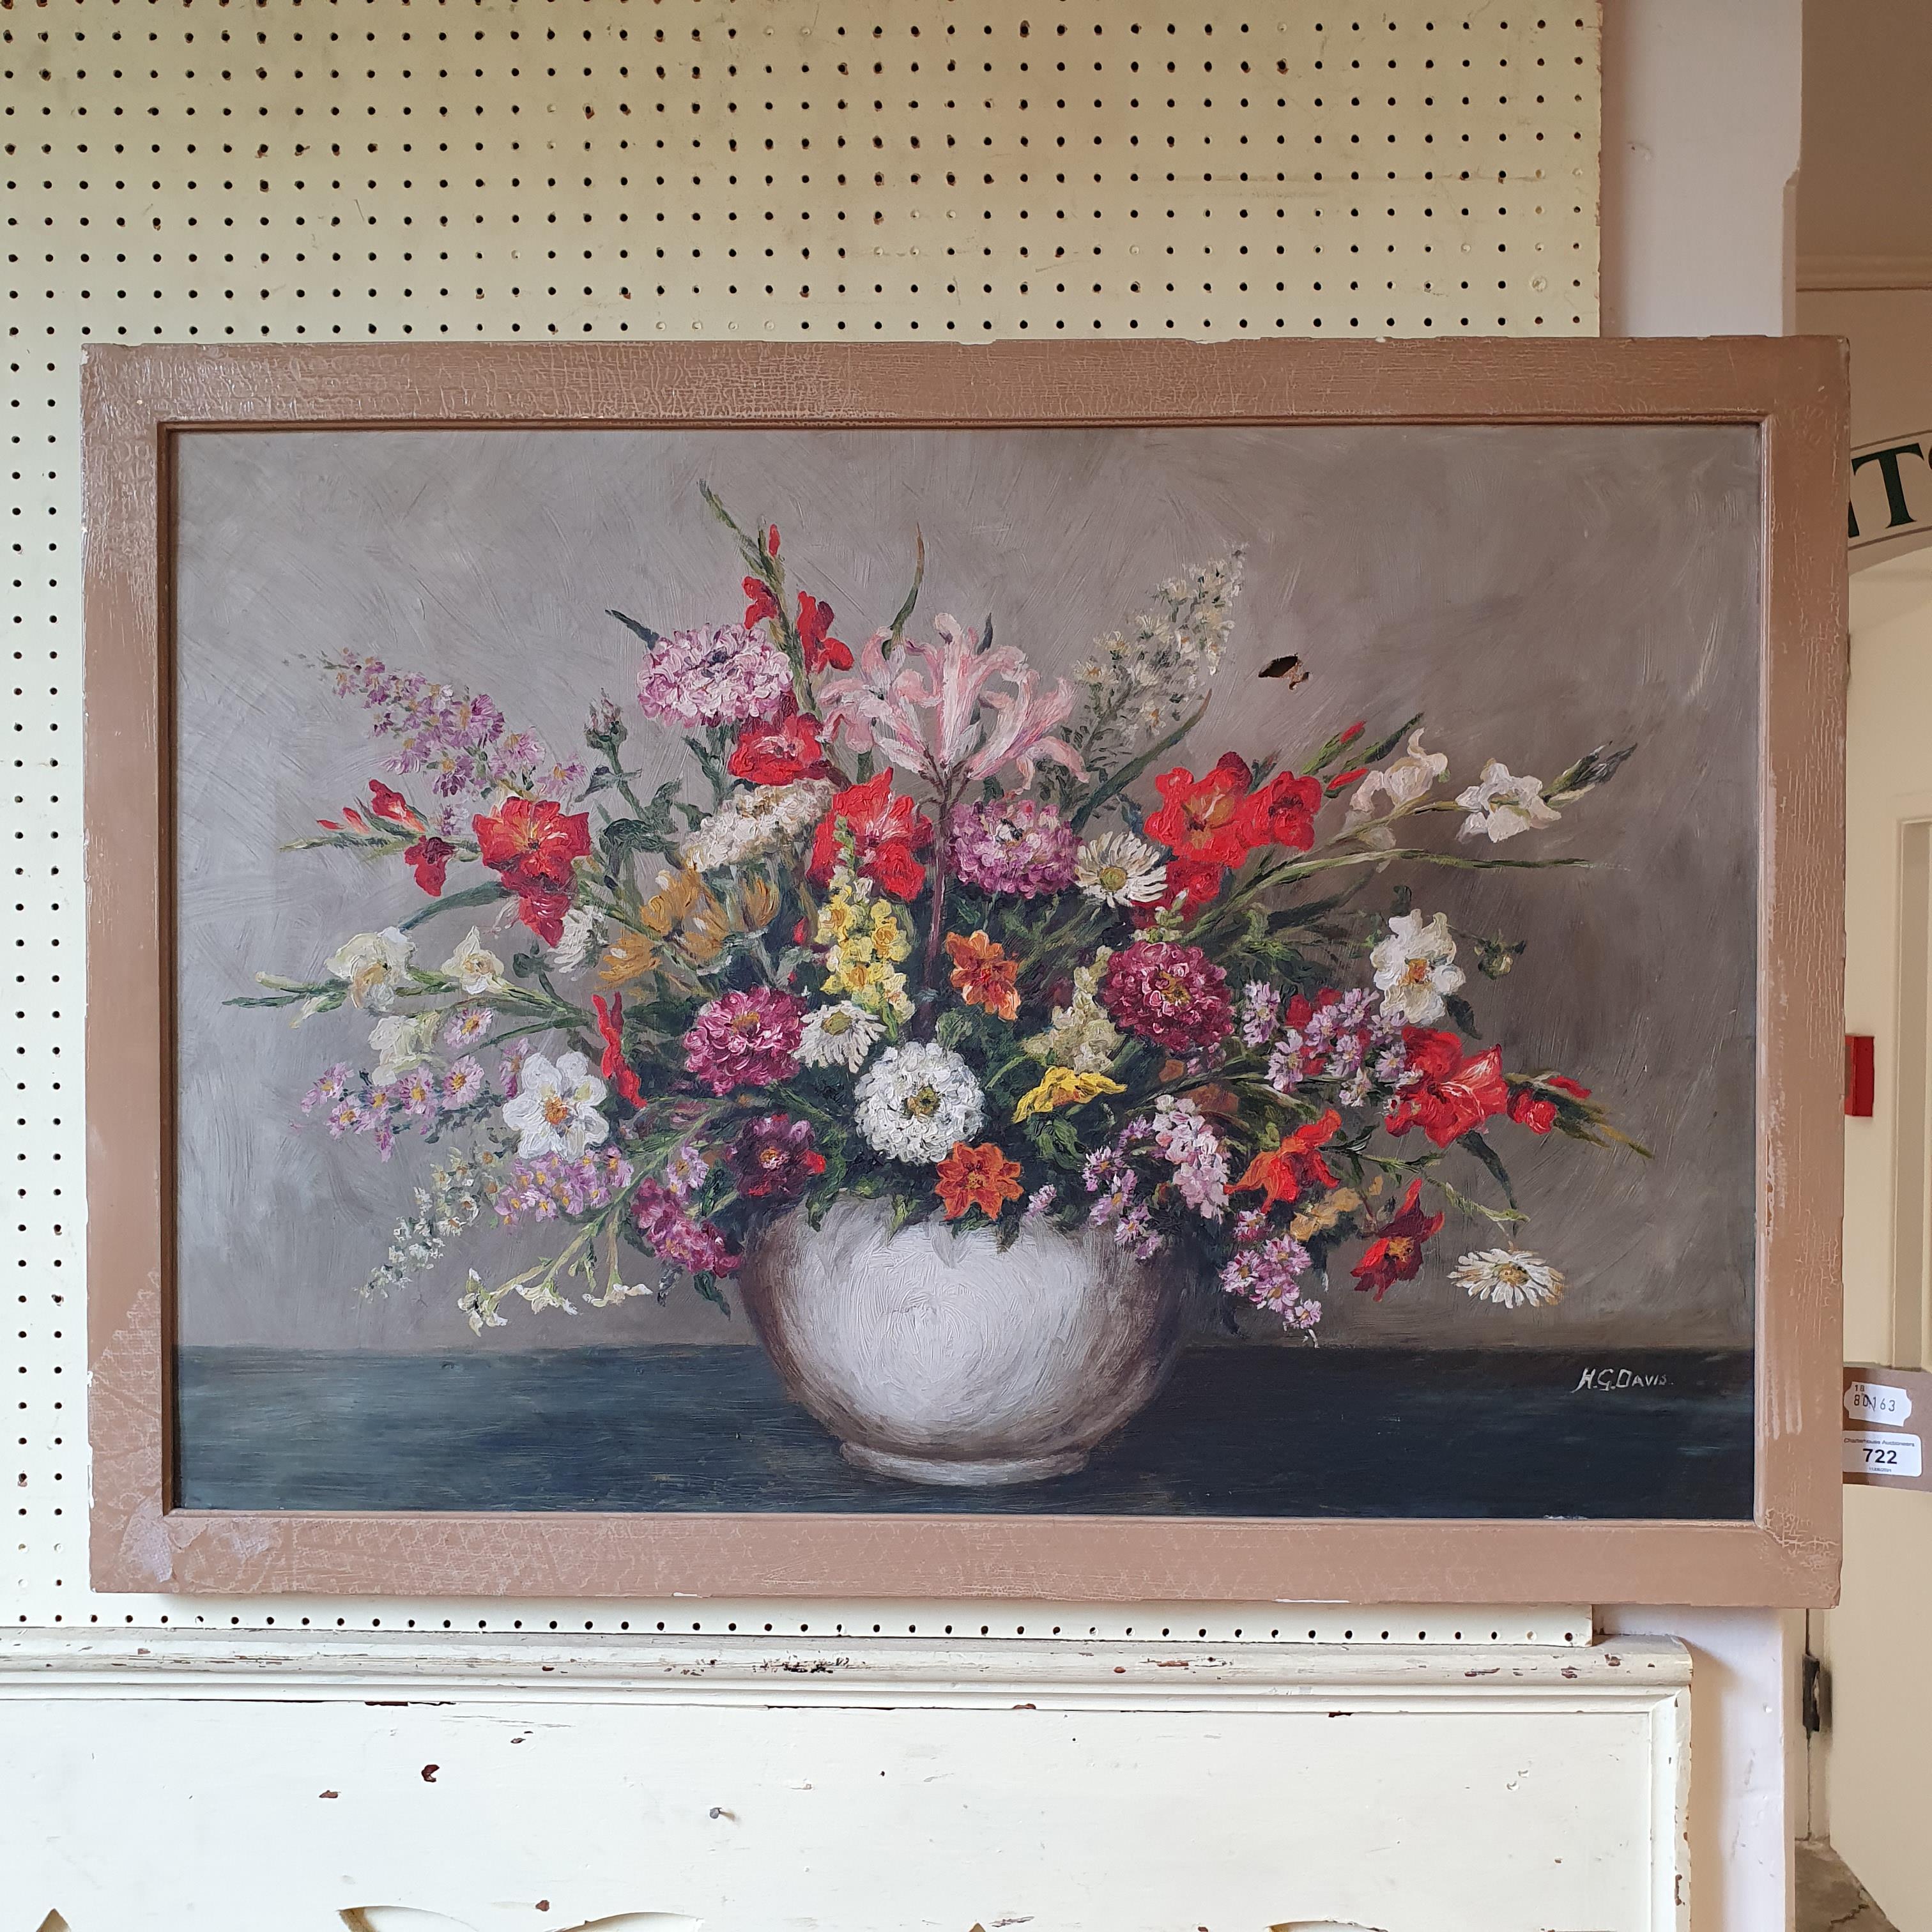 H G Davis, still life of flowers, oil on canvas, signed, 56 x 80 cm Hole to the canvas - Image 2 of 3